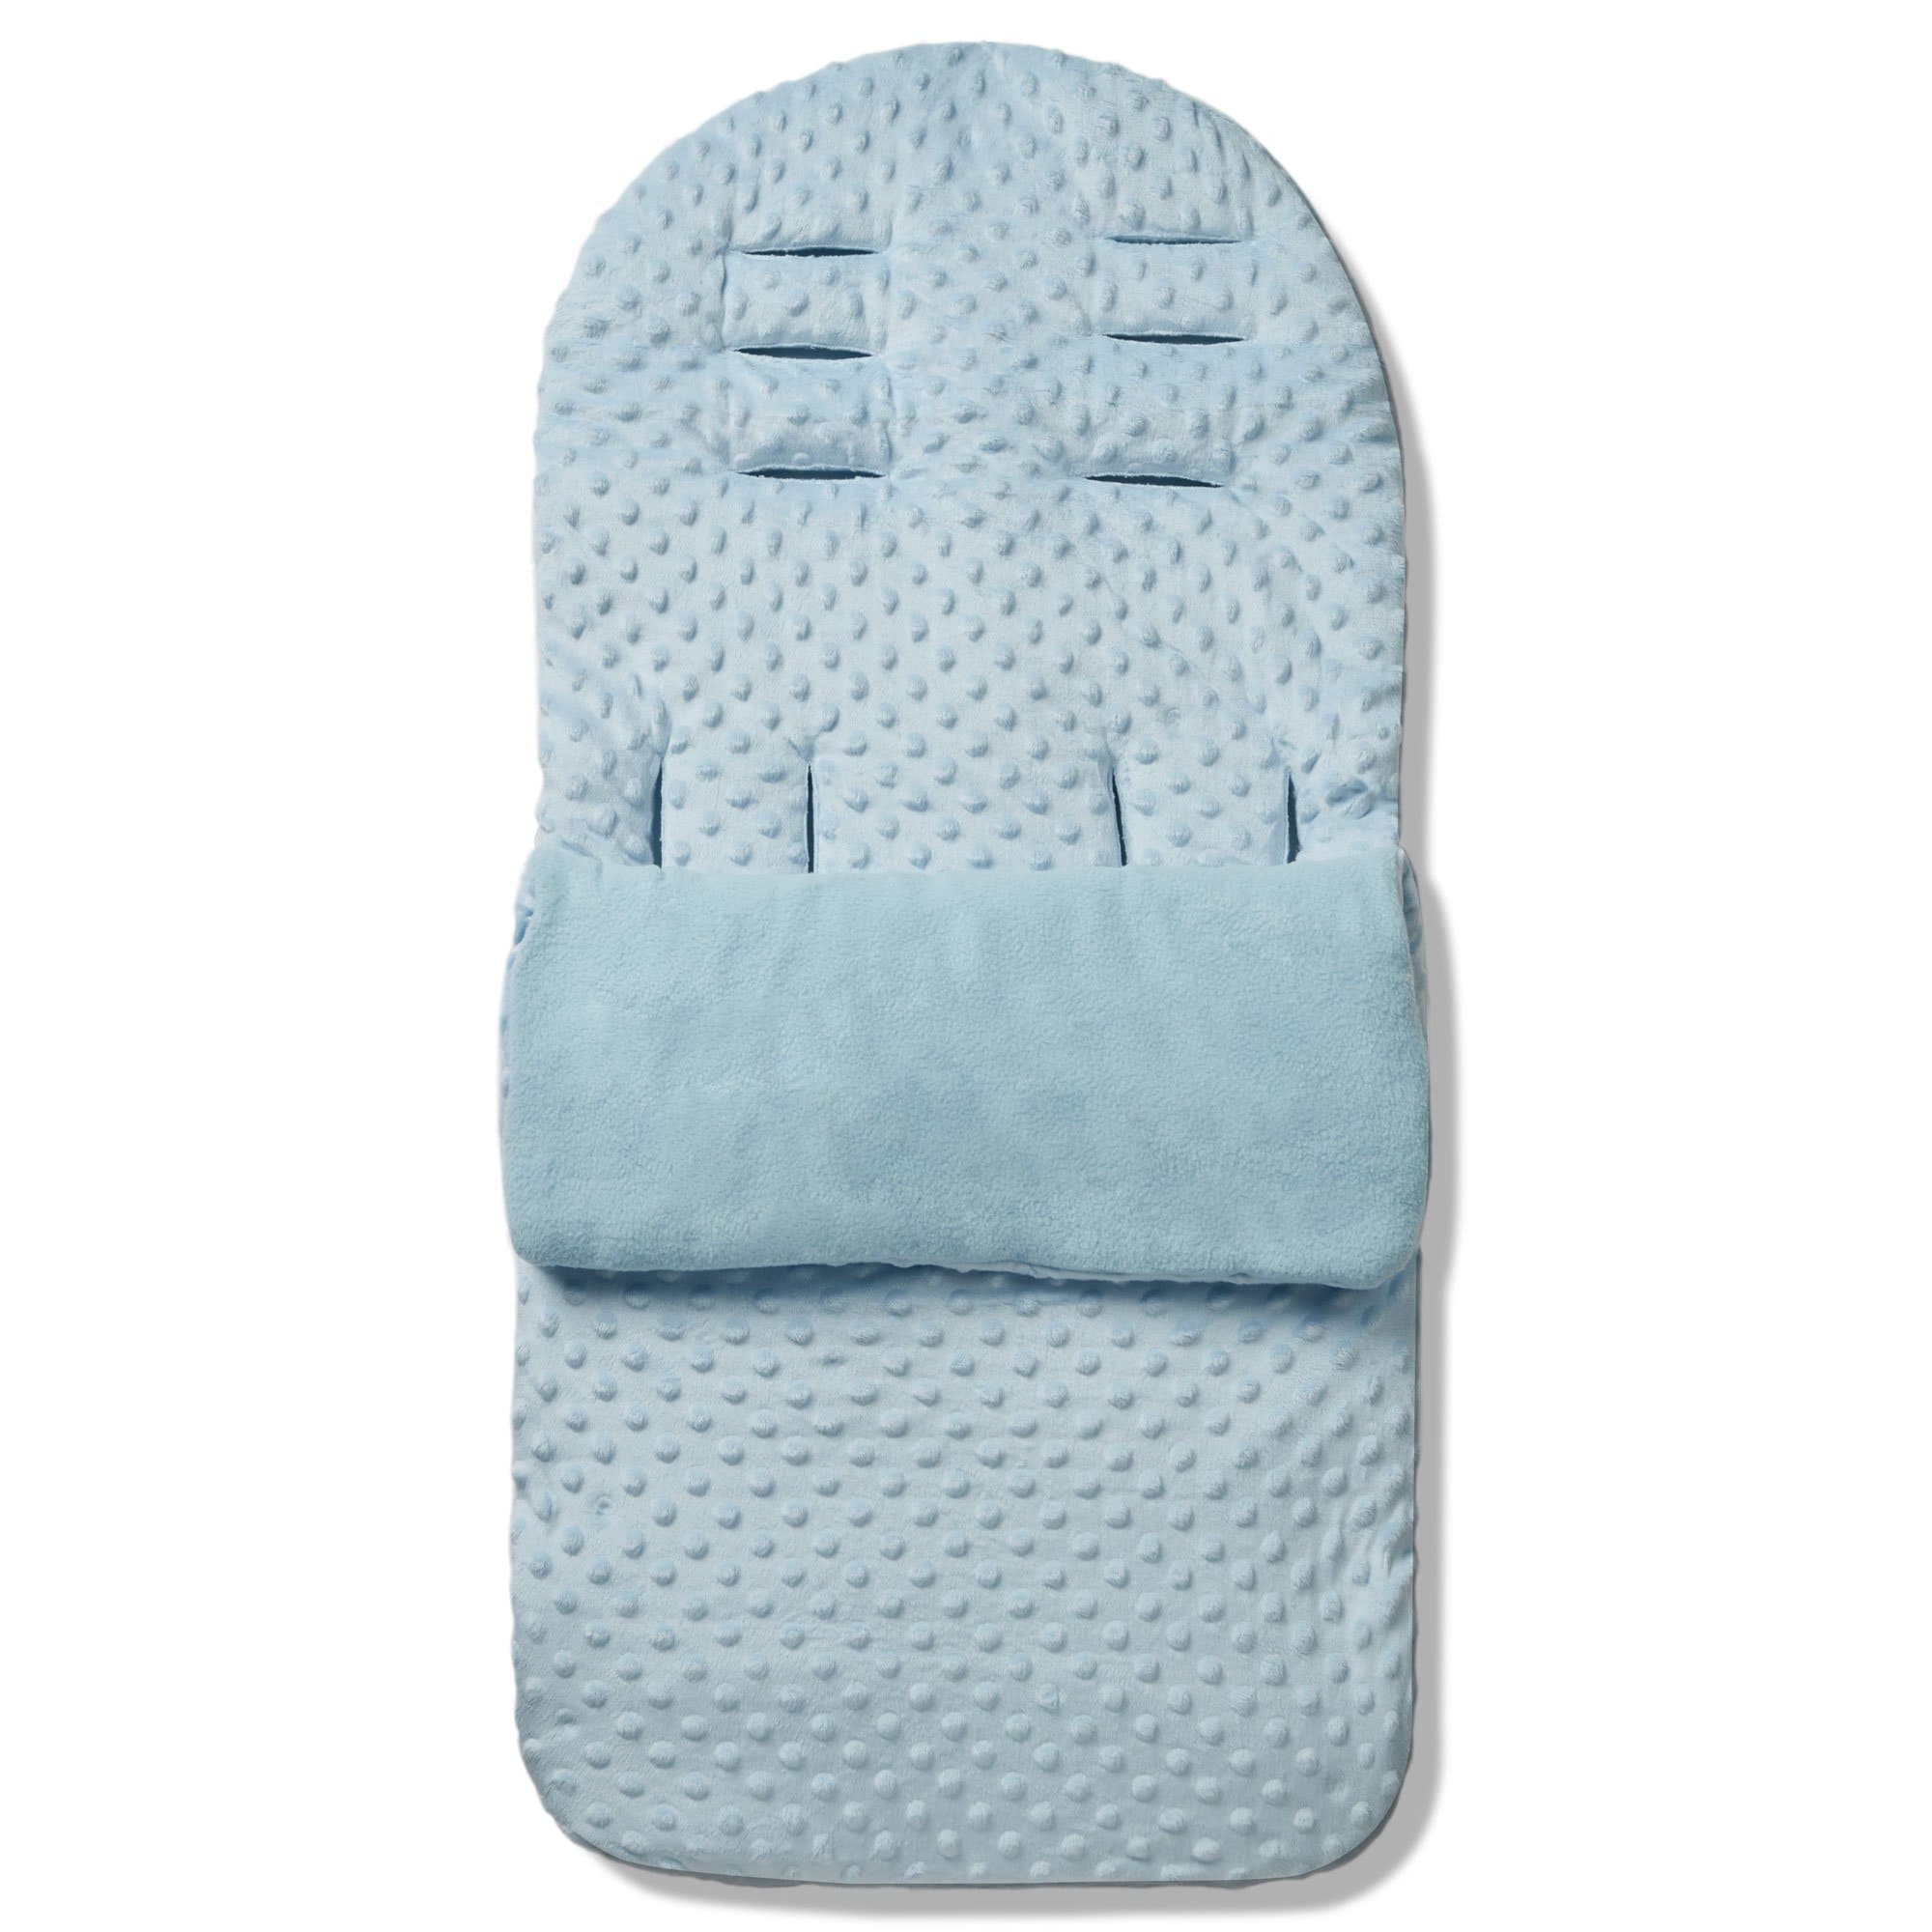 Dimple Footmuff / Cosy Toes Compatible with Hesba - For Your Little One